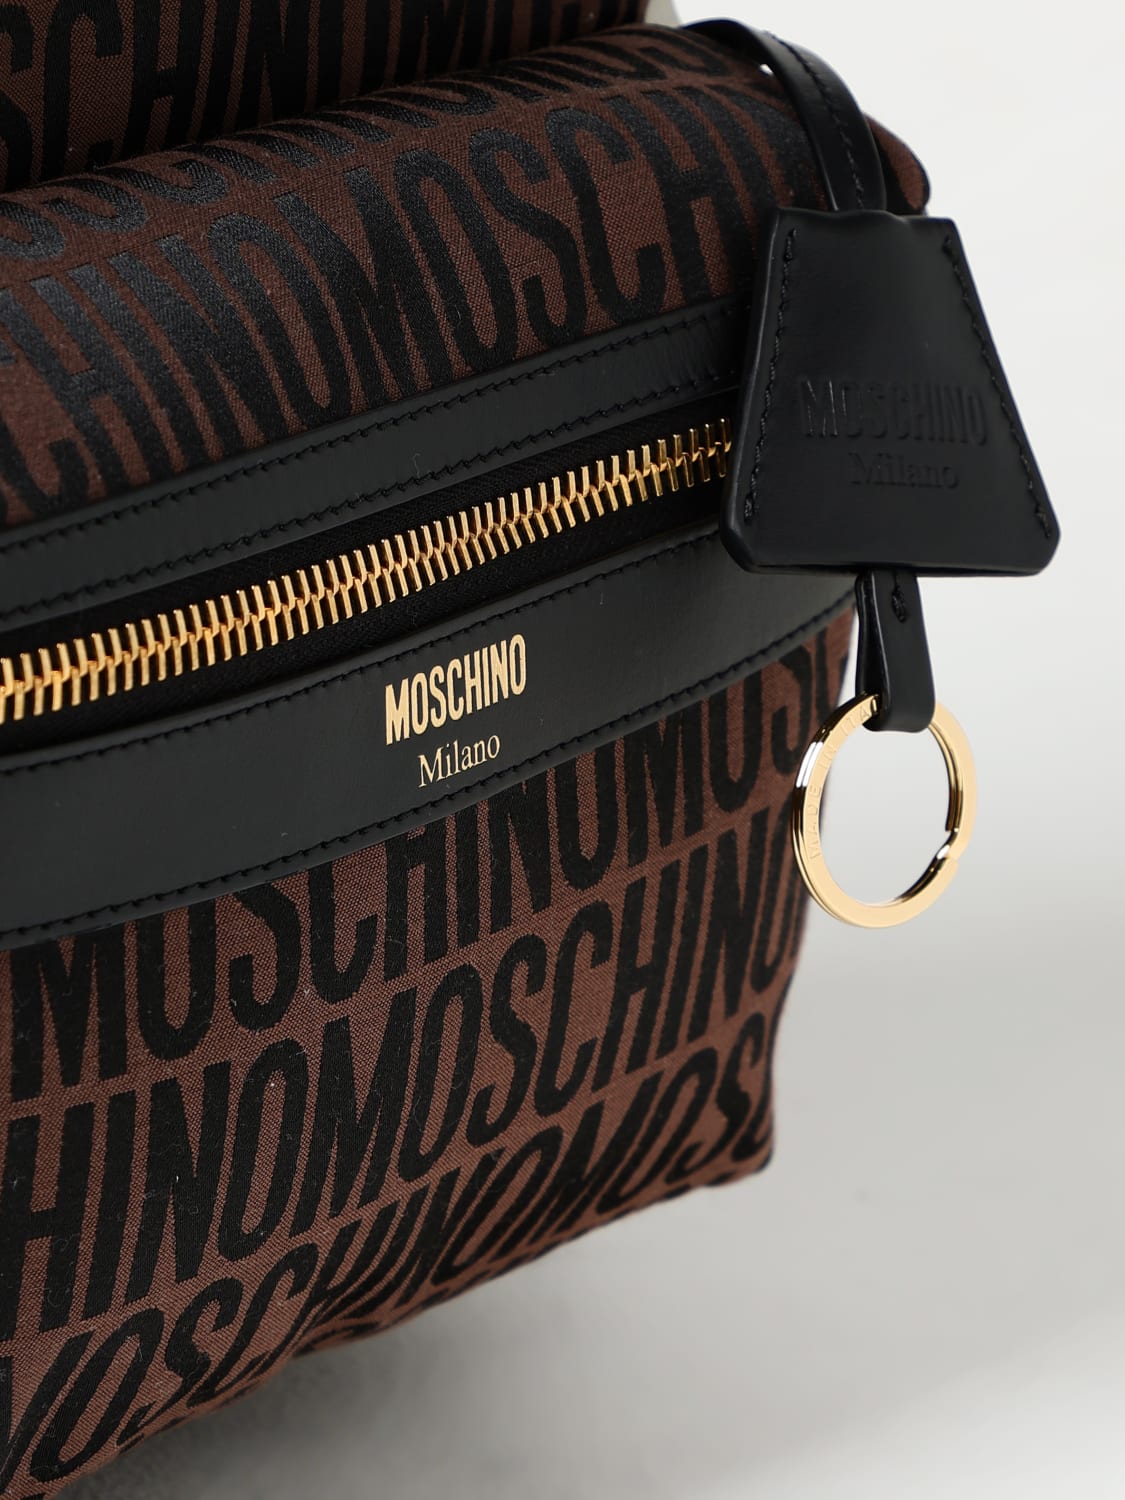 Backpack men Moschino Couture